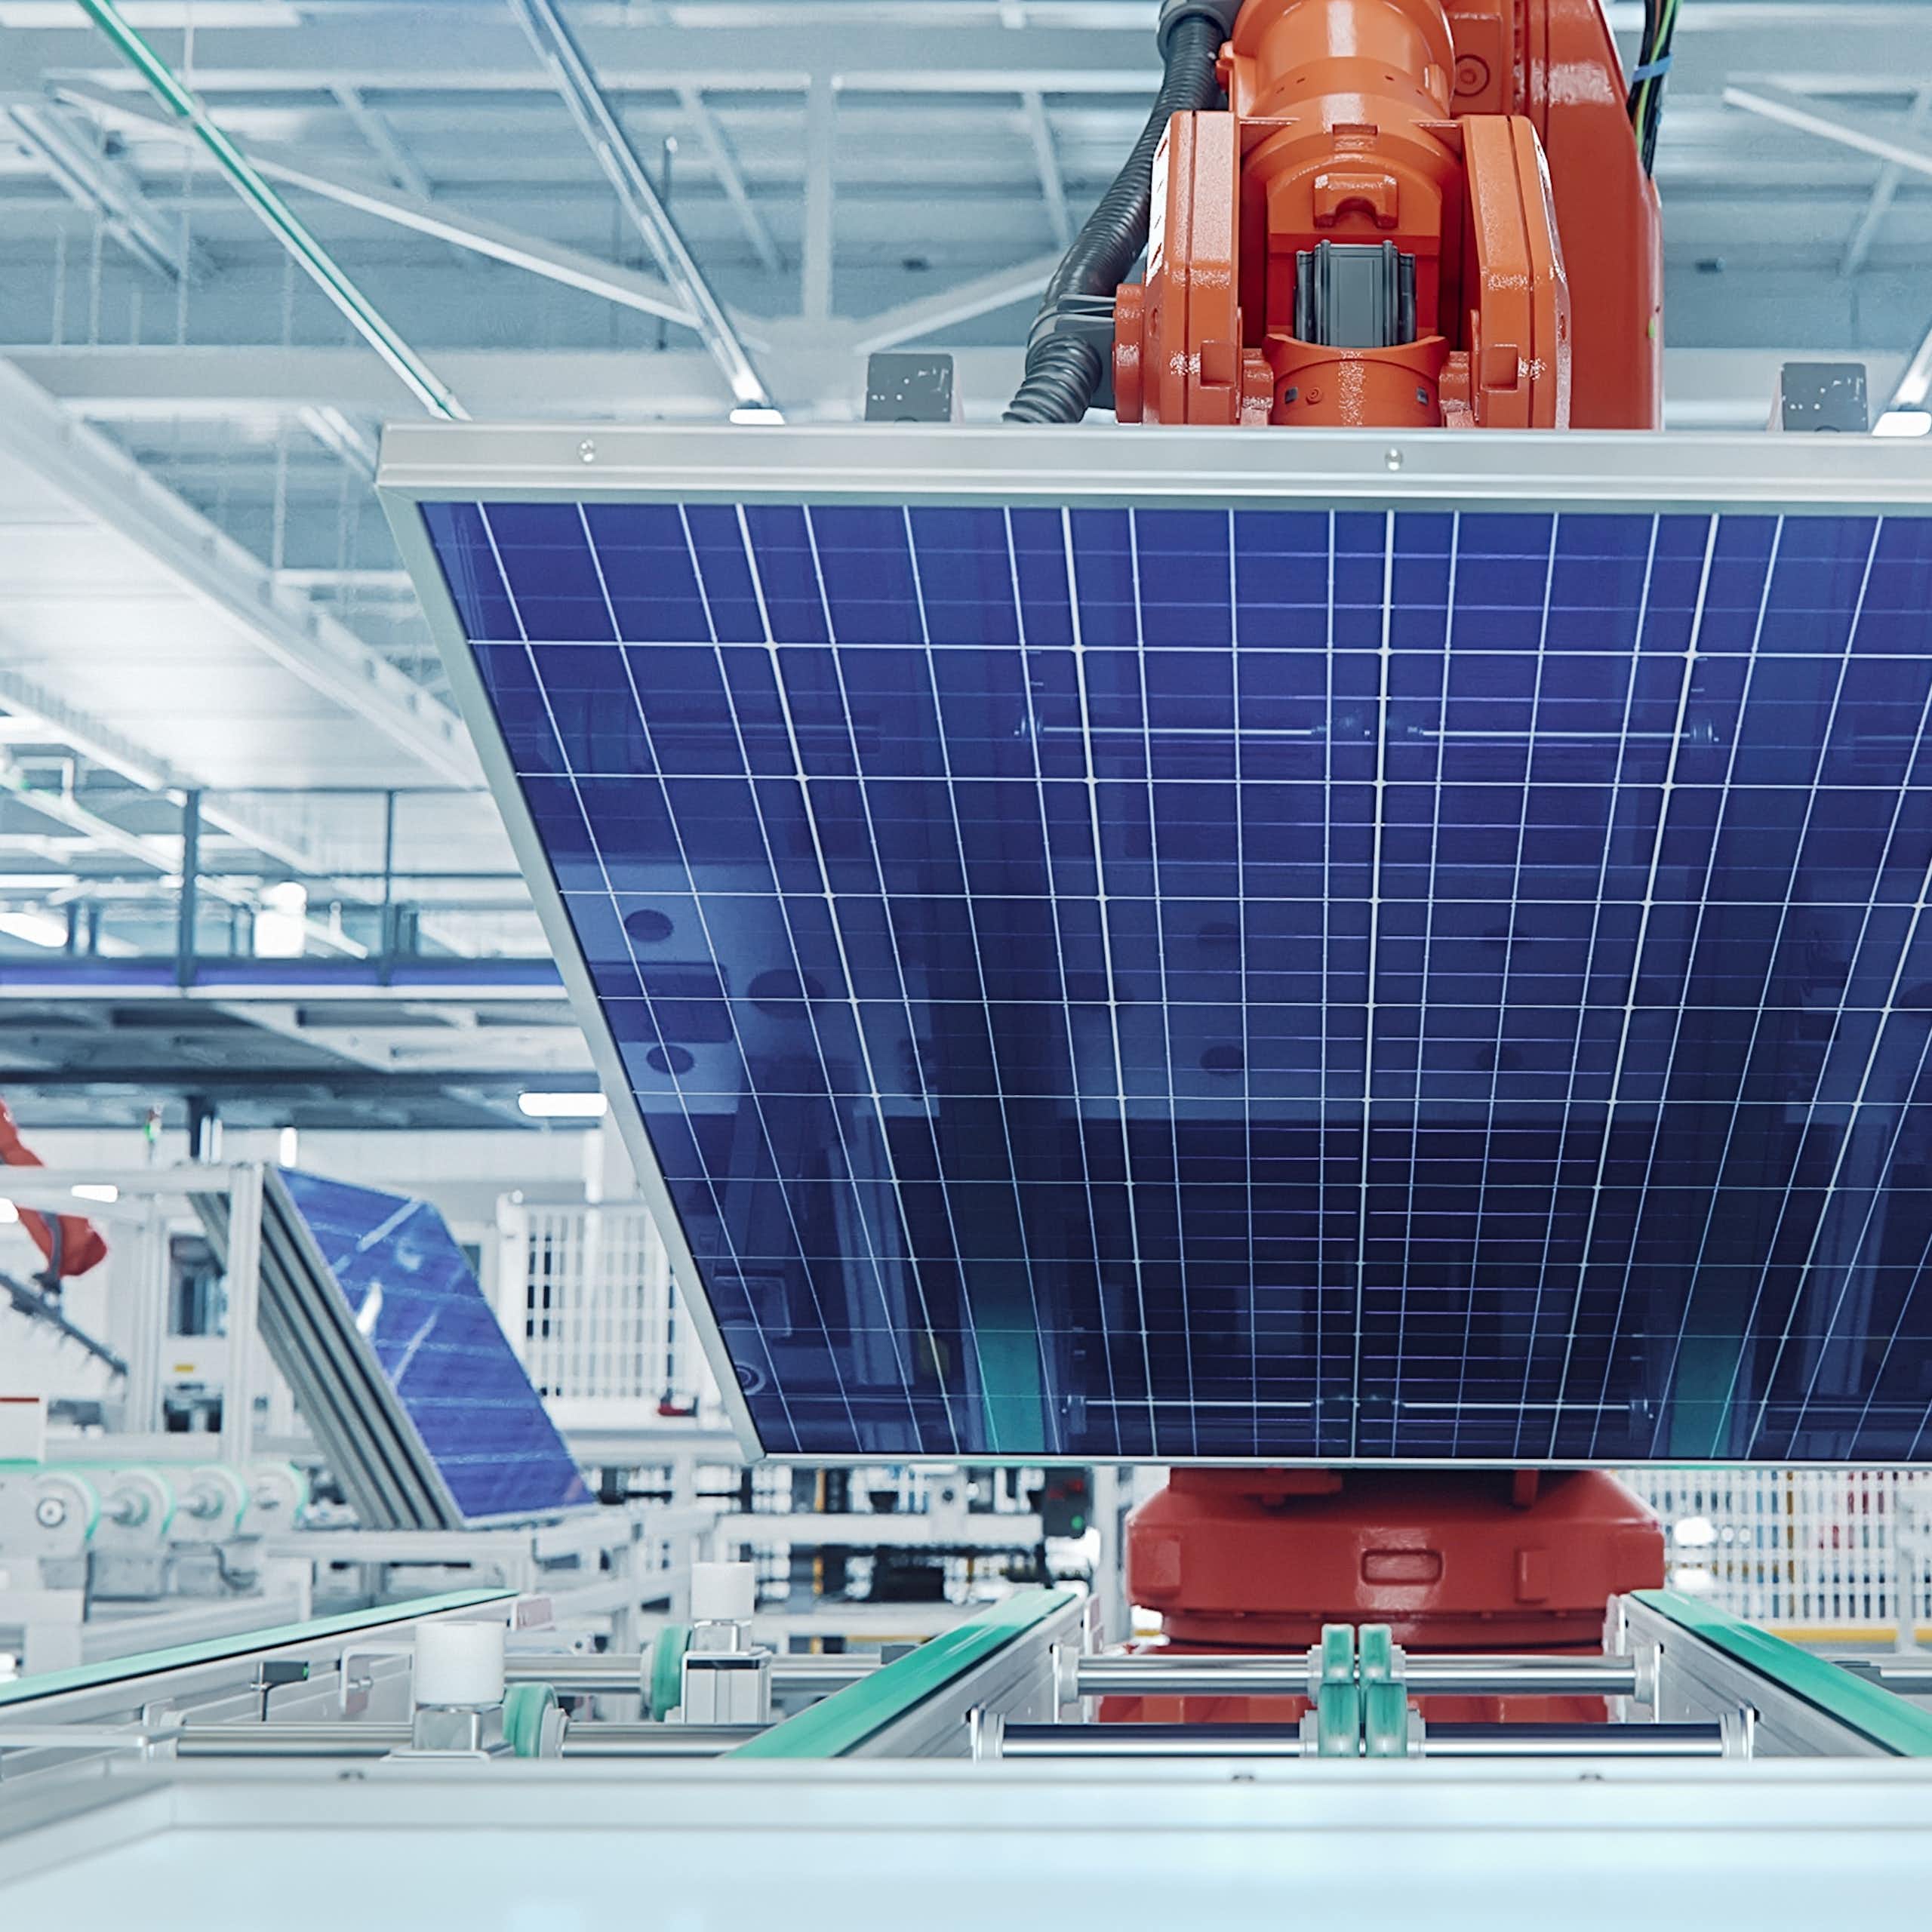 Orange Industrial Robot Arm Grabs and Moves Solar Panels on Conveyor